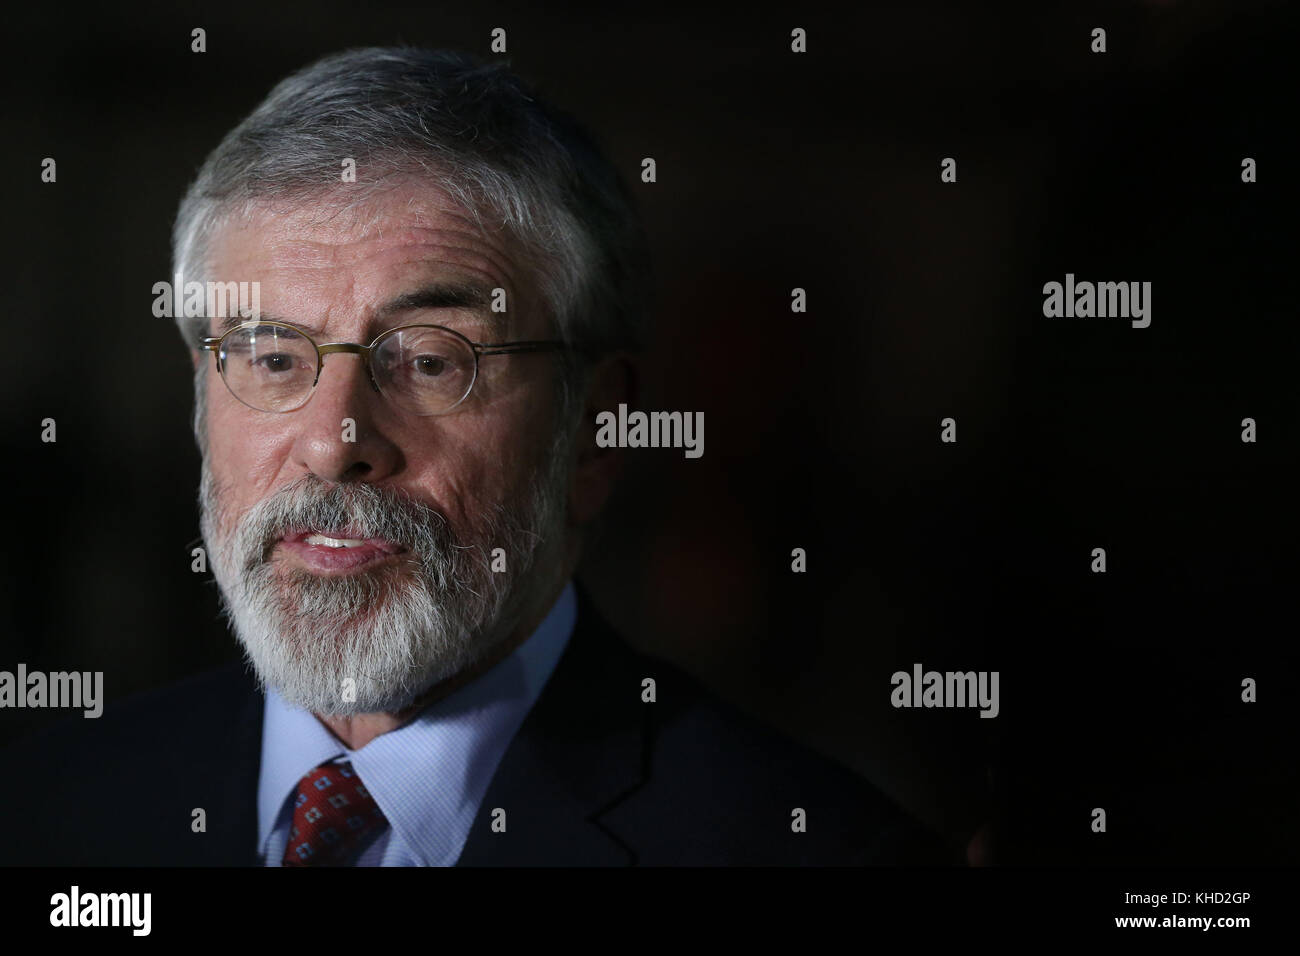 Sinn Fein's party president Gerry Adams speaking to the media at Leinster House ahead of a meeting about powersharing. Mr Adams has insisted that a deal can still be reached with the DUP to restore powersharing at Stormont. Stock Photo